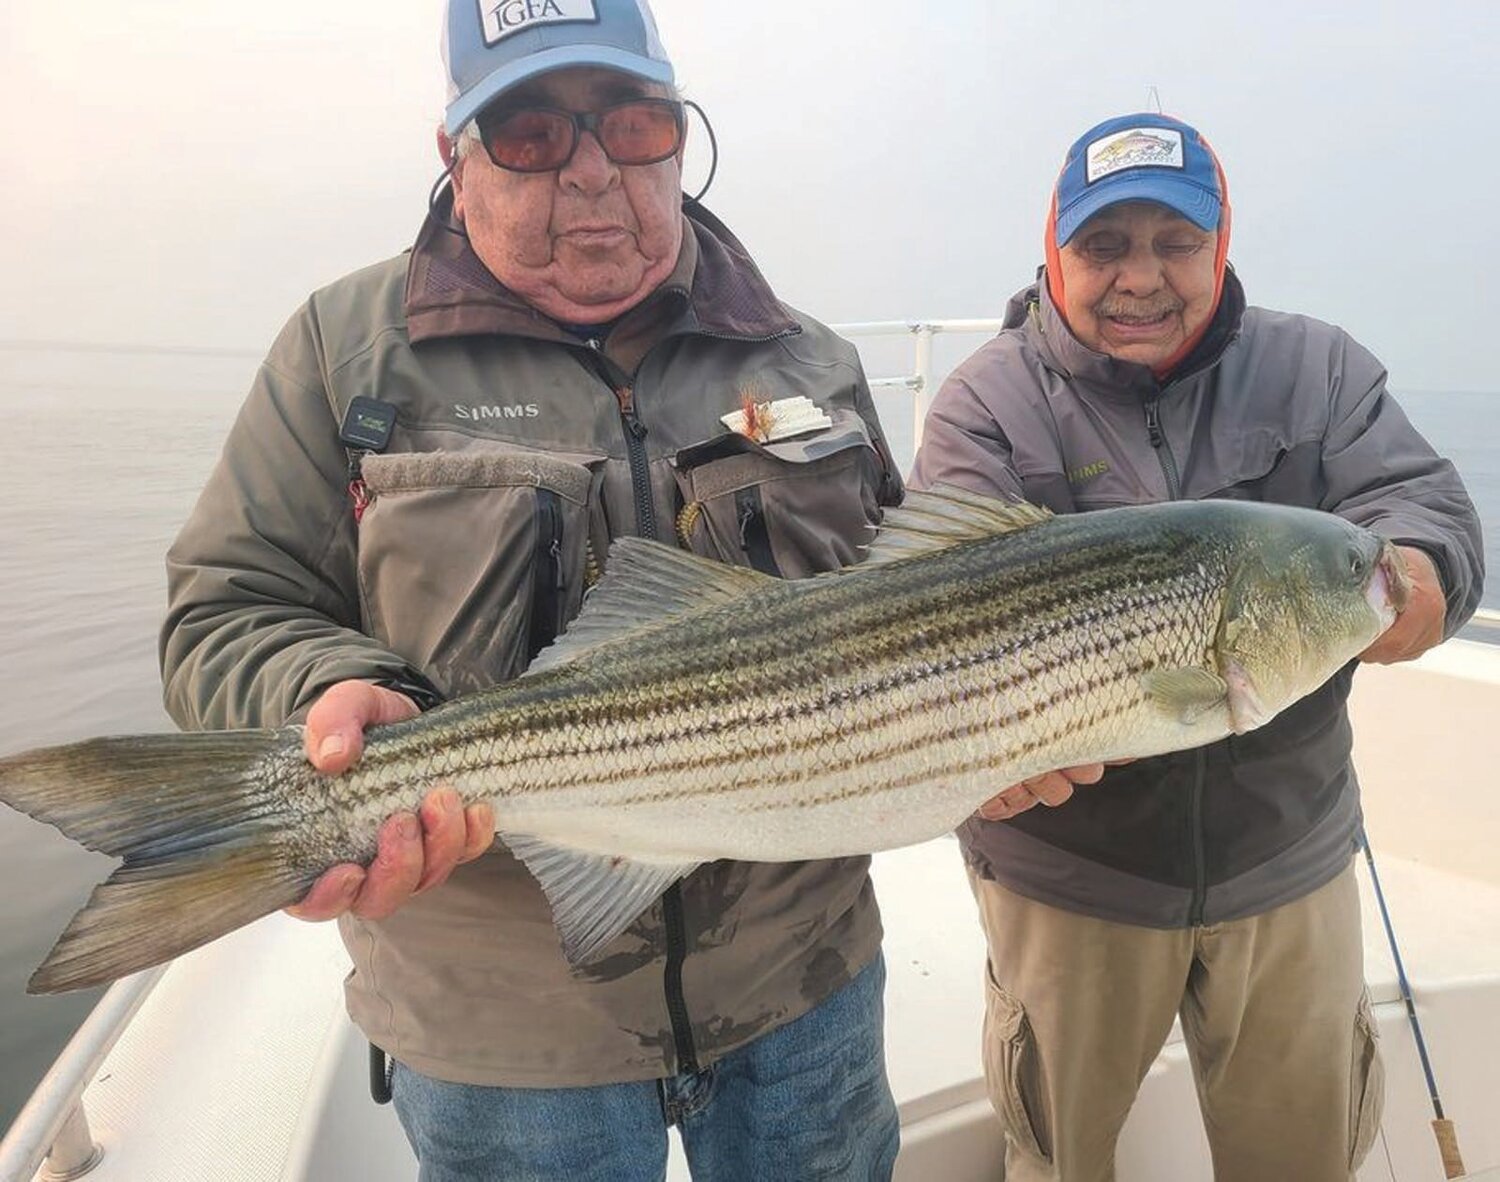 ON THE FLY: Fly fishing expert Dave Pollack and Mario Renzi hooked up with multiple striped bass to 25 pounds on Cast-a-Fly Charters last Thursday. (Submitted photos)